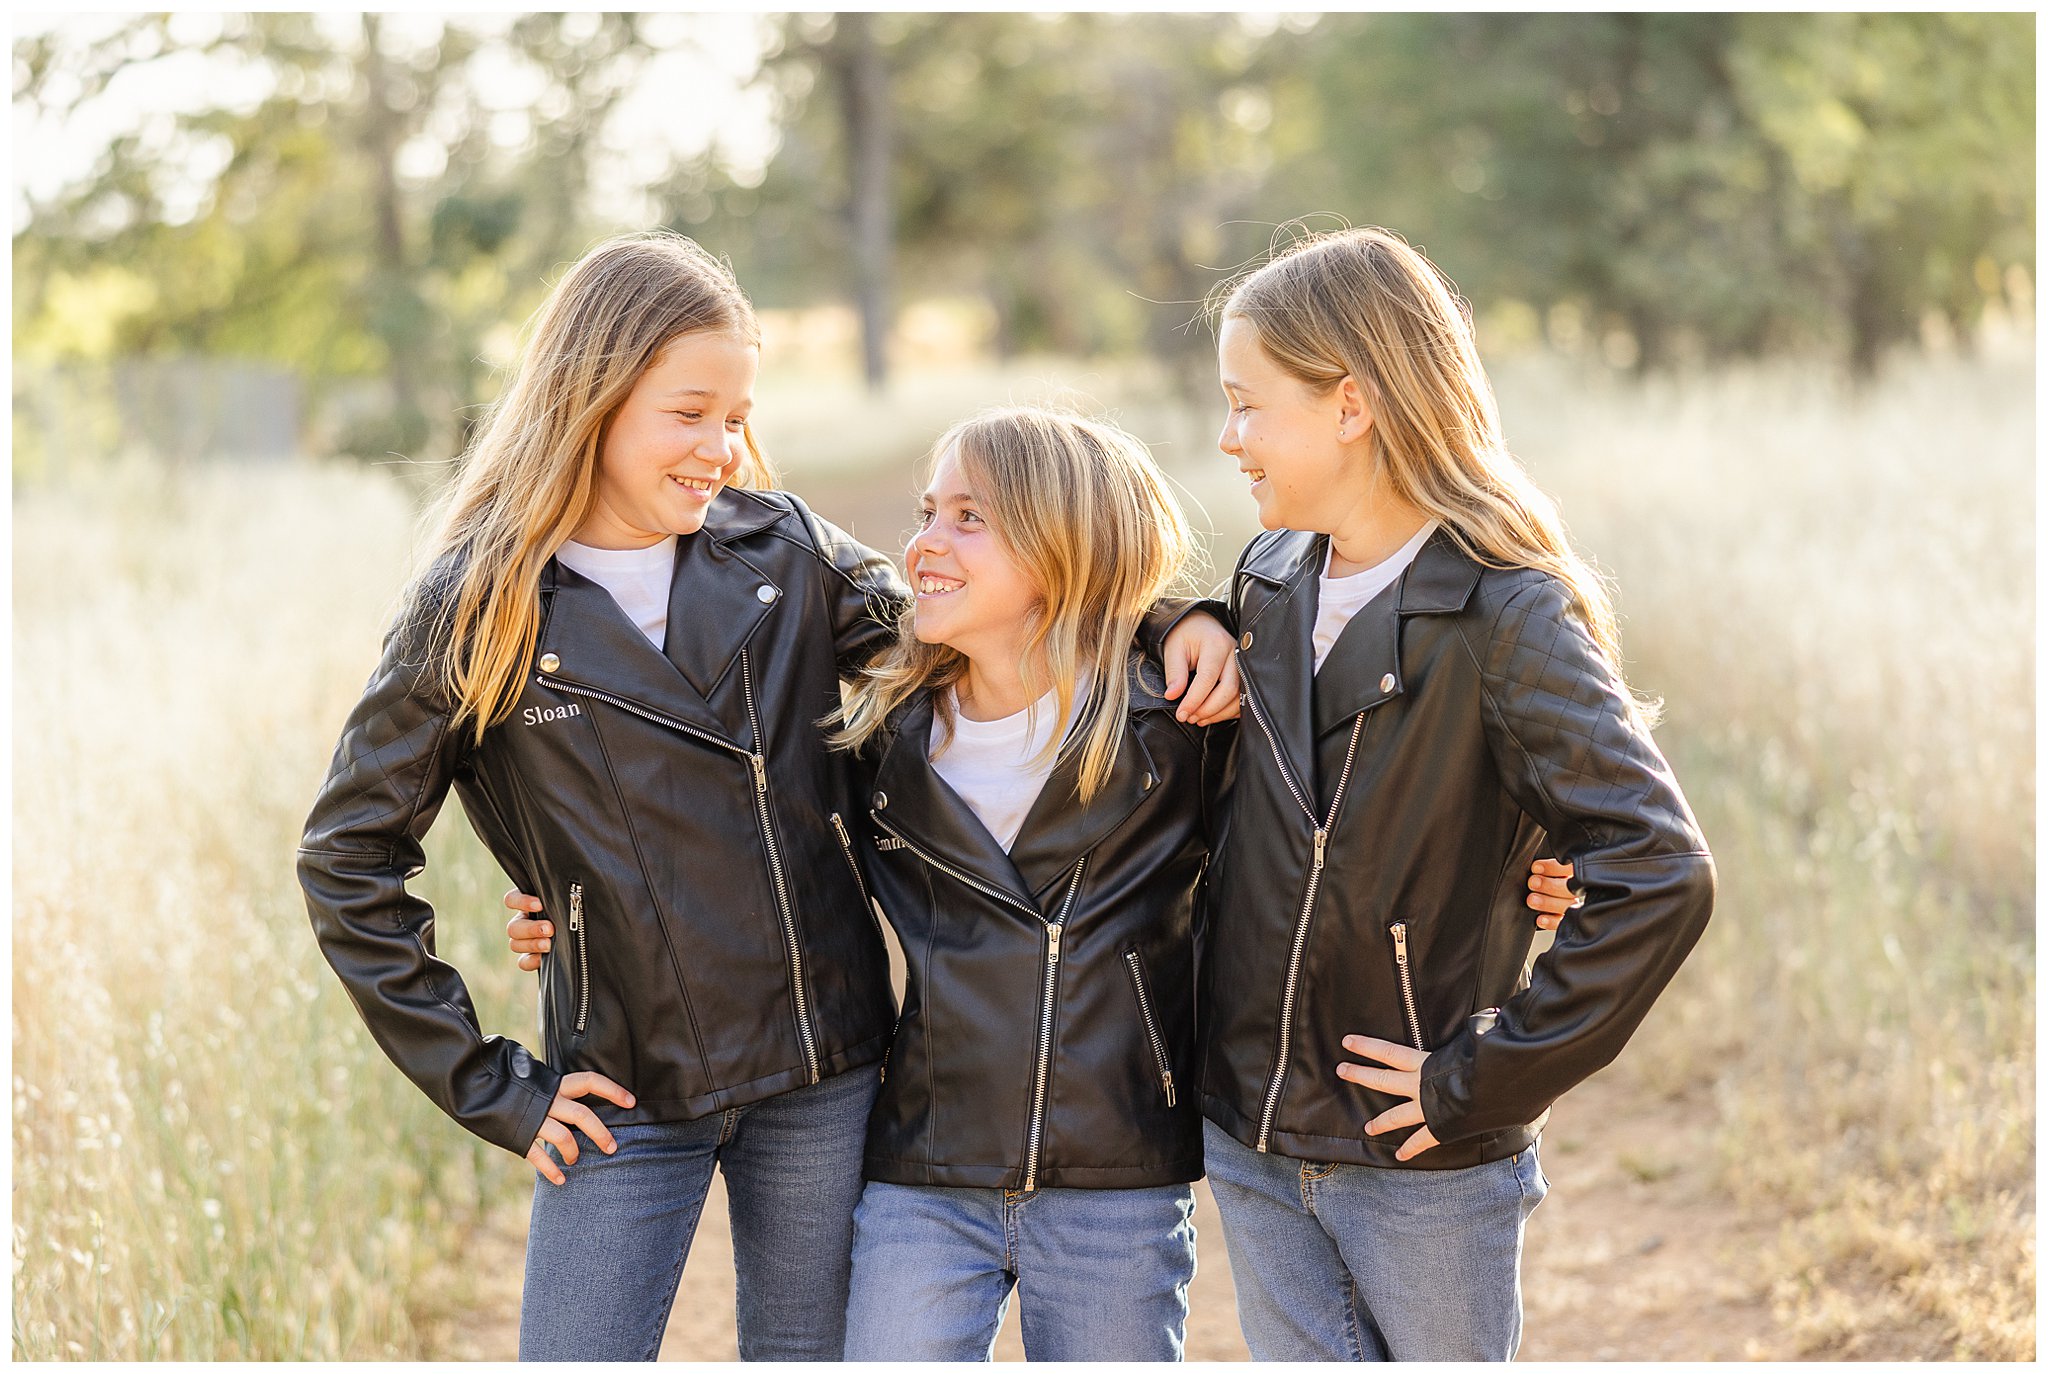 Upper Bidwell Park Trail Girlfriends Session Chico CA Moto Jackets Jeans Spring May,